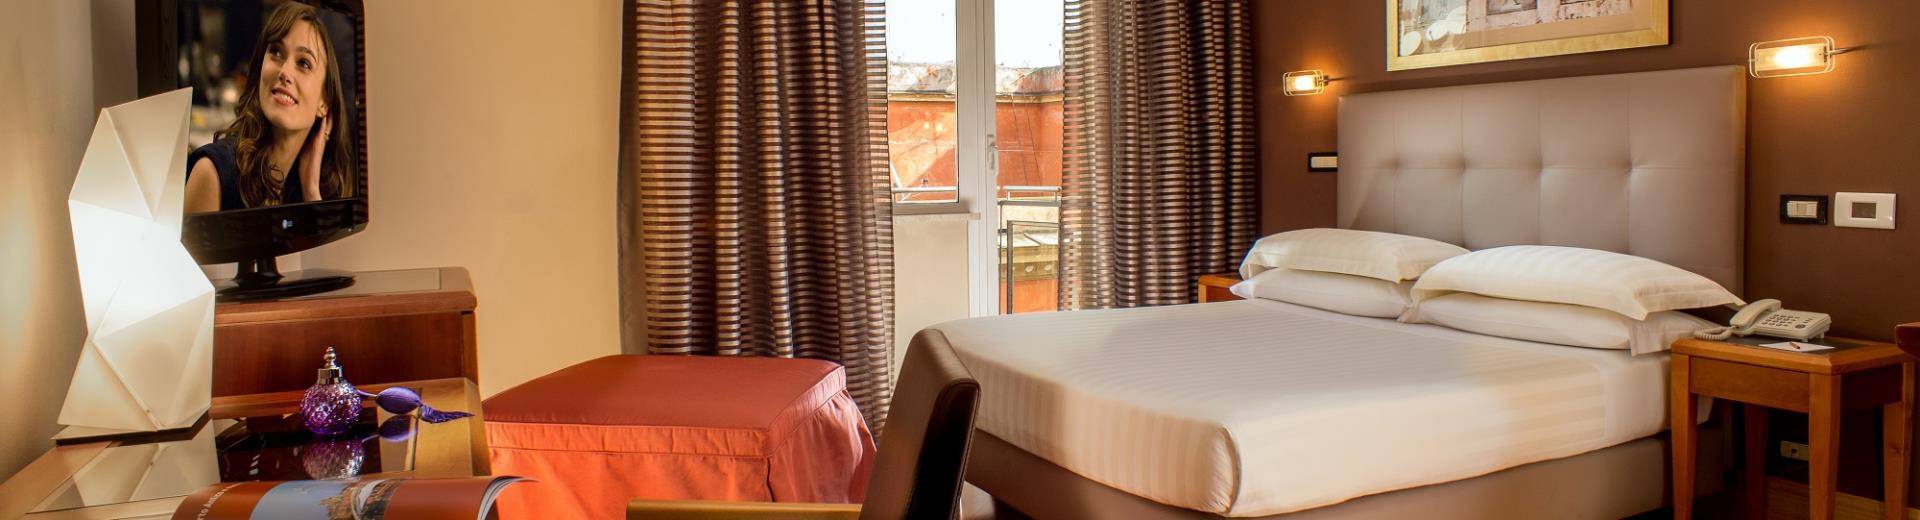 Check out the rooms and the comfort of the Best Western Plus Hotel Spring House Rome